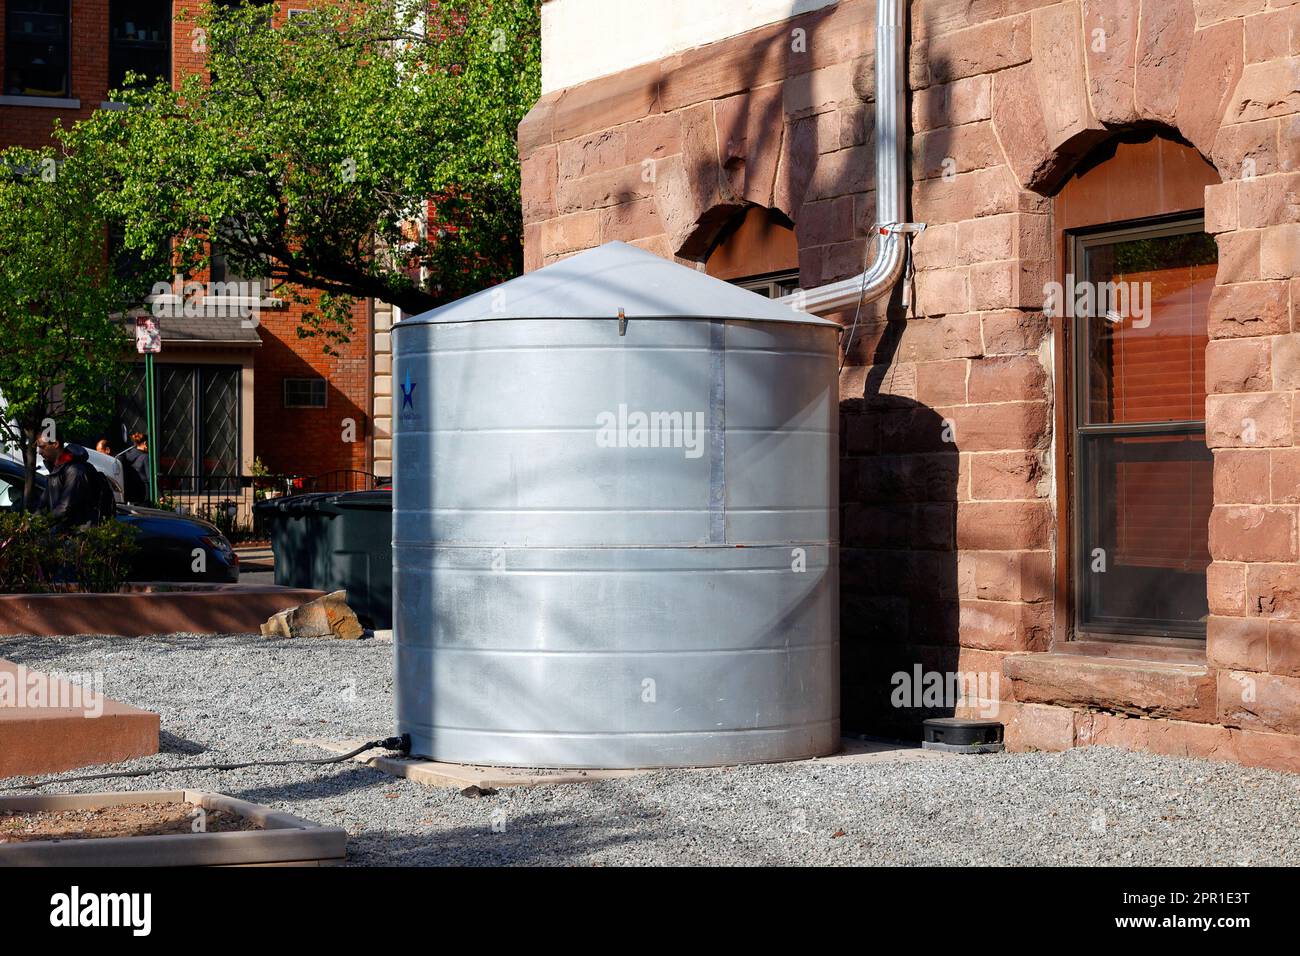 One of four 400 gal capacity galvanized rainwater cisterns used to collect rainwater from the rooftop of Hoboken City Hall. Stock Photo